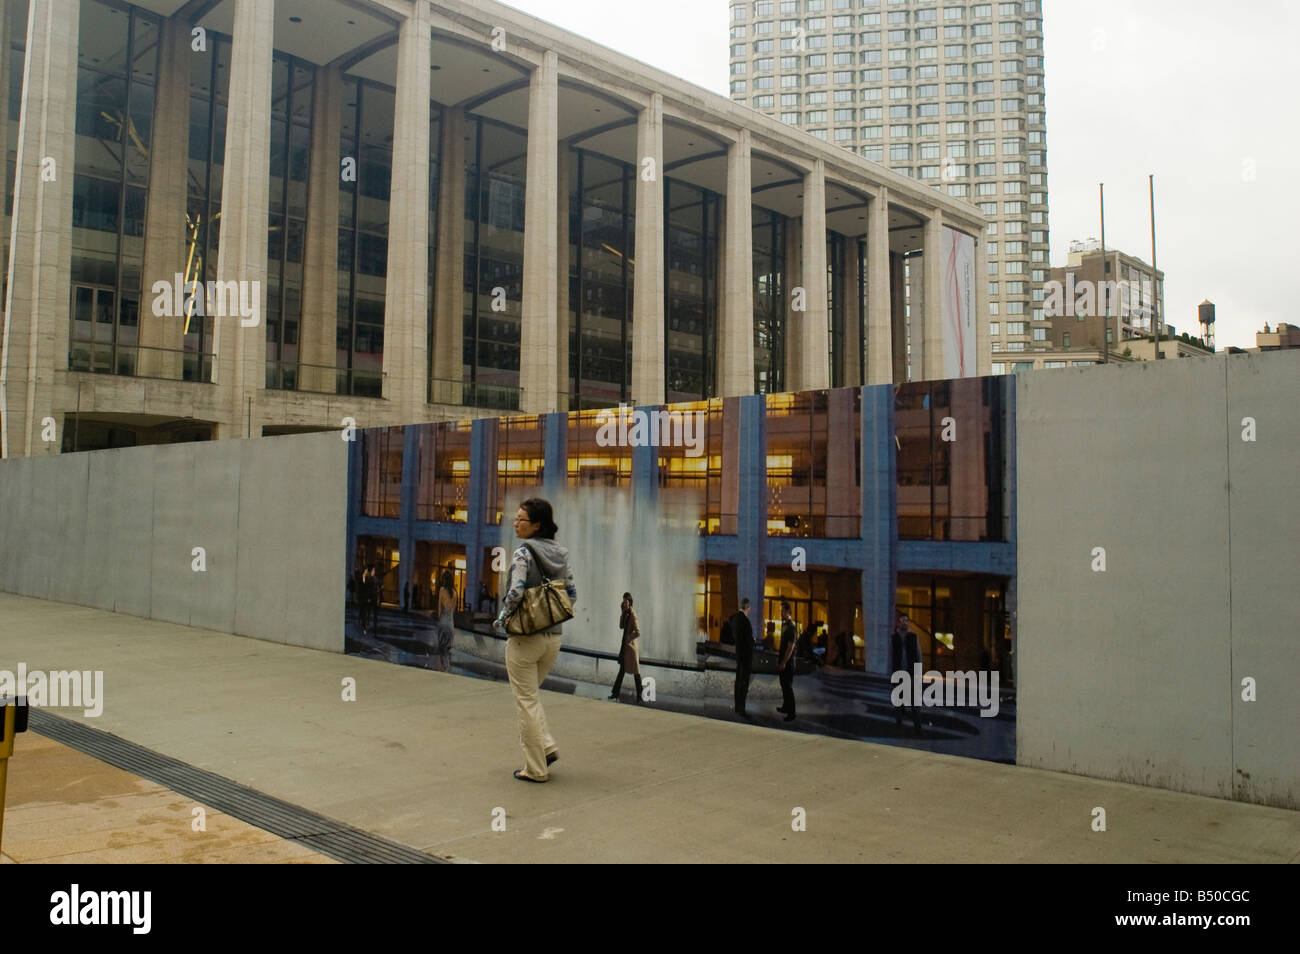 A woman passes by Lincoln Center in New York Stock Photo